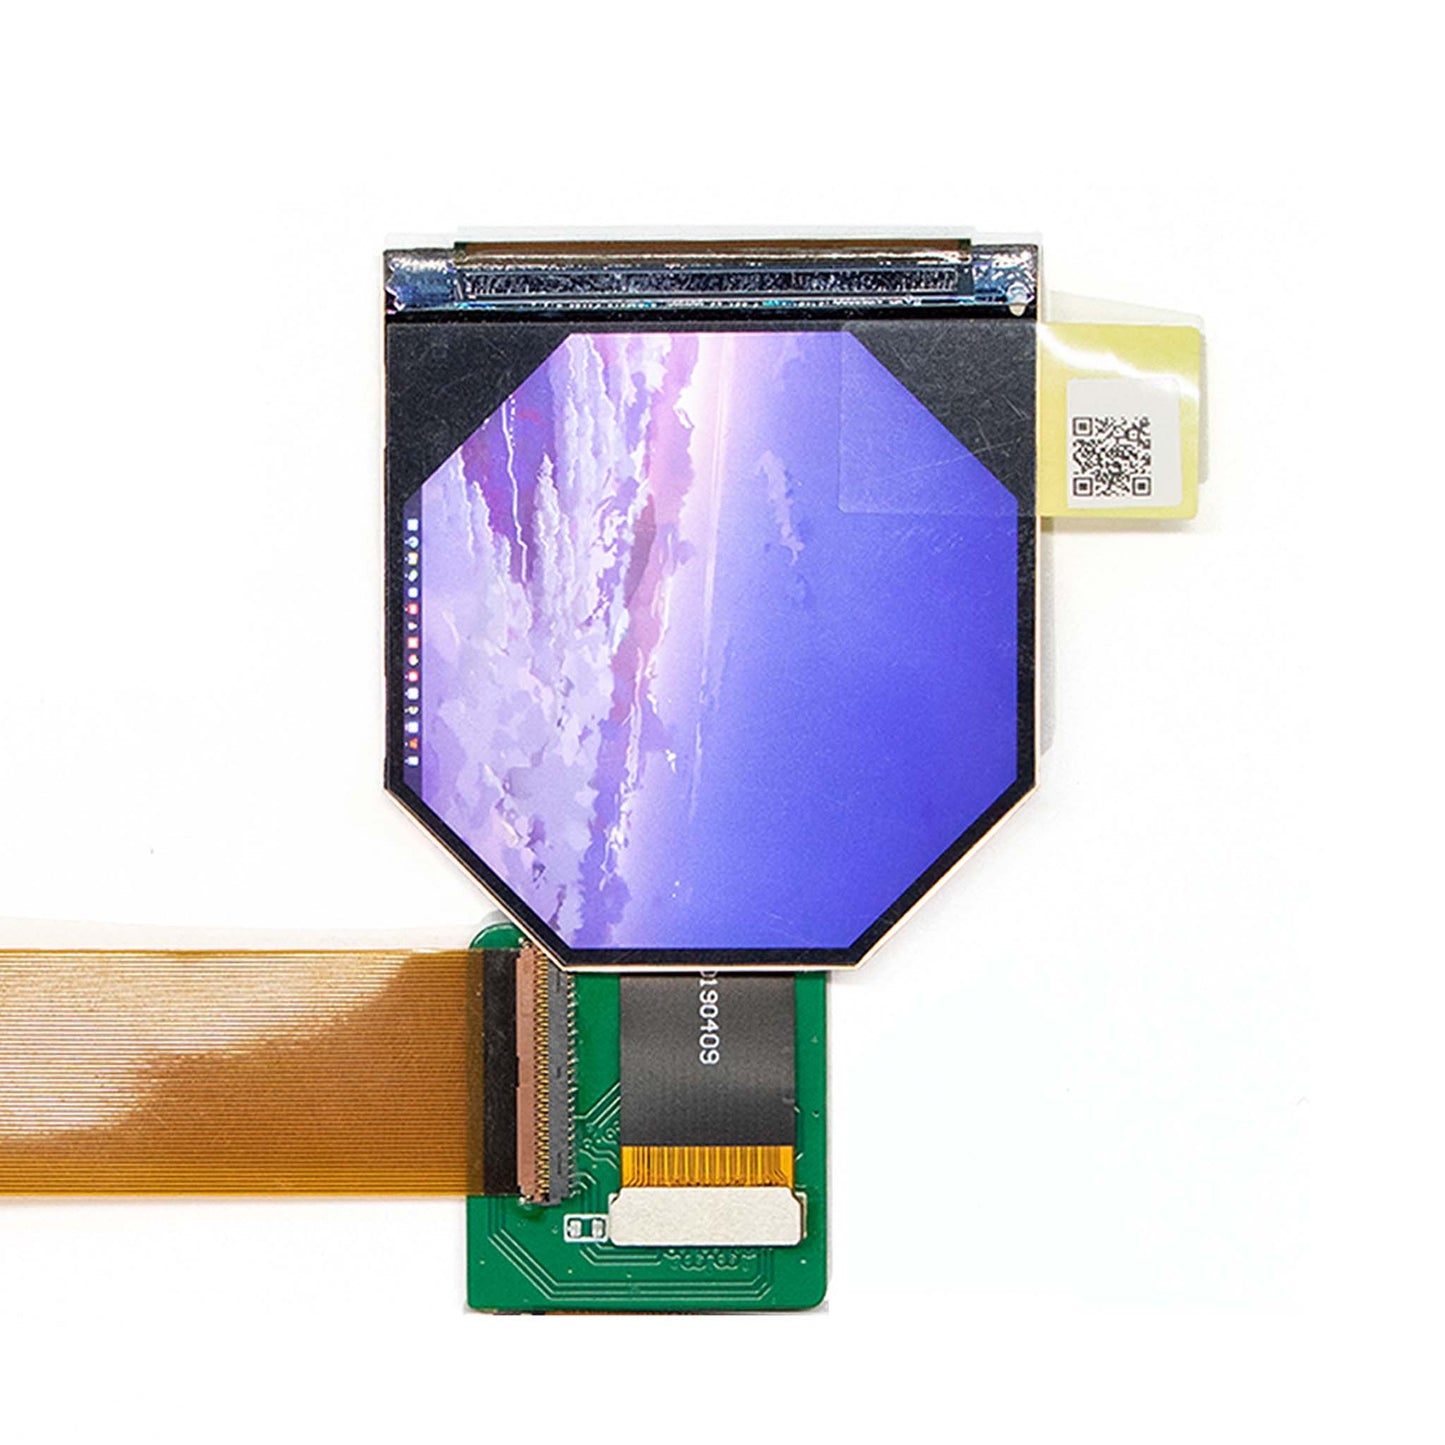 2.1 inch TFT Micro Display designed for VR with 1600x1600 resolution and 1058ppi, utilizing MIPI DSI interface